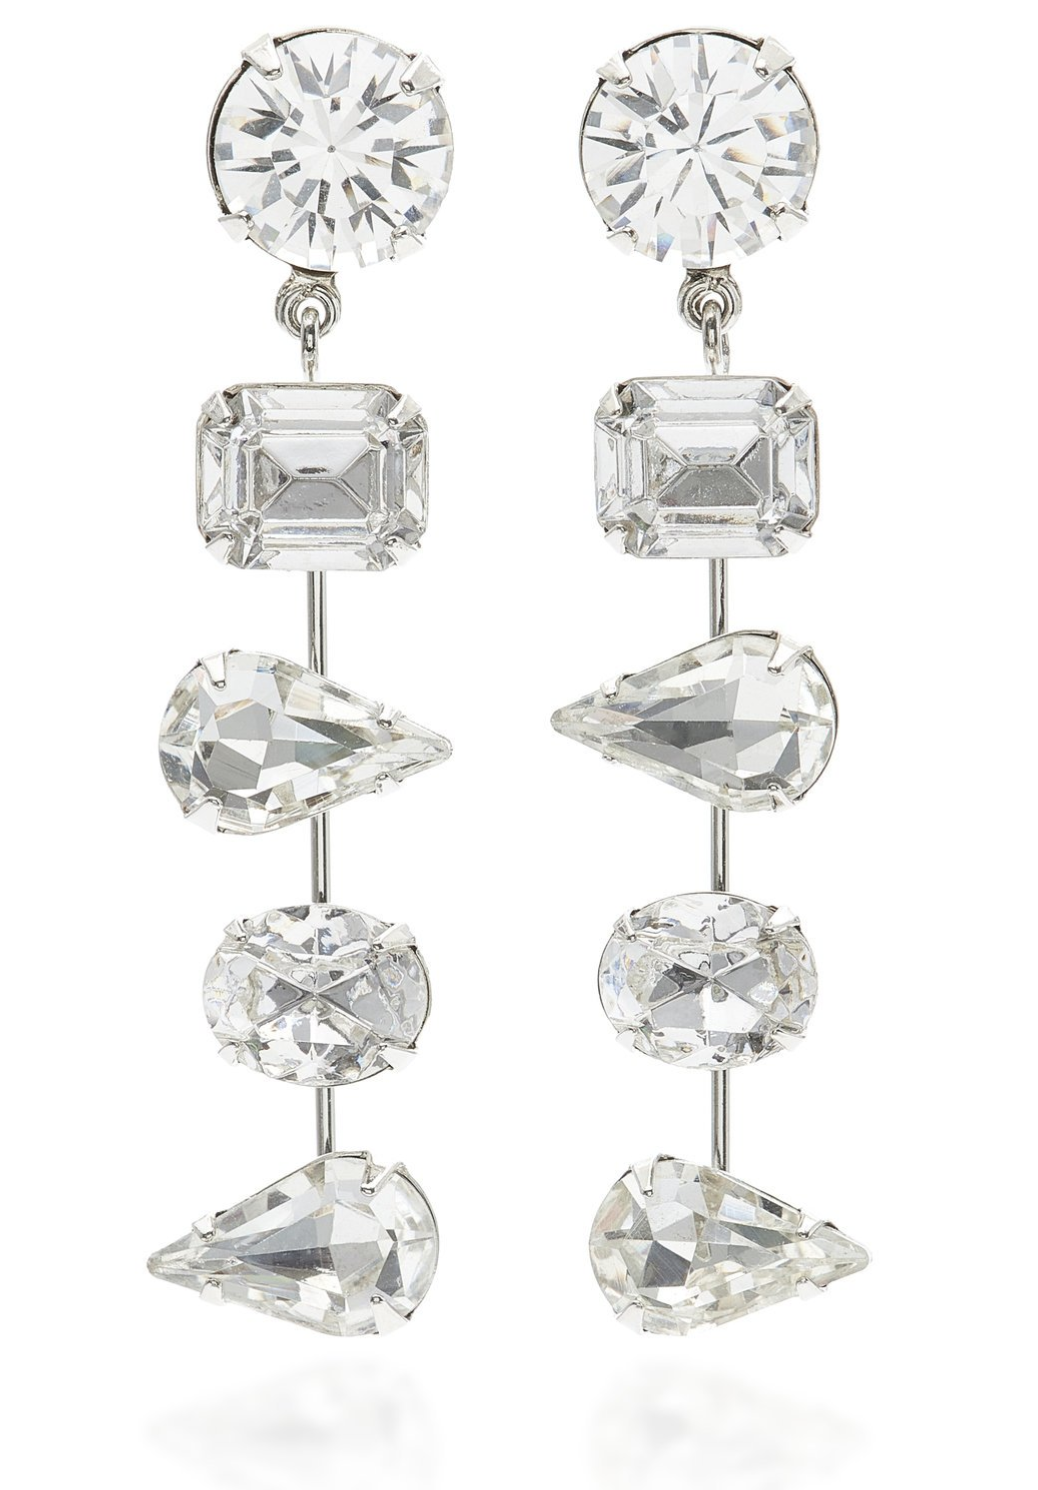 sparkle-in-style-this-new-years-eve-jennifer-behr-earrings